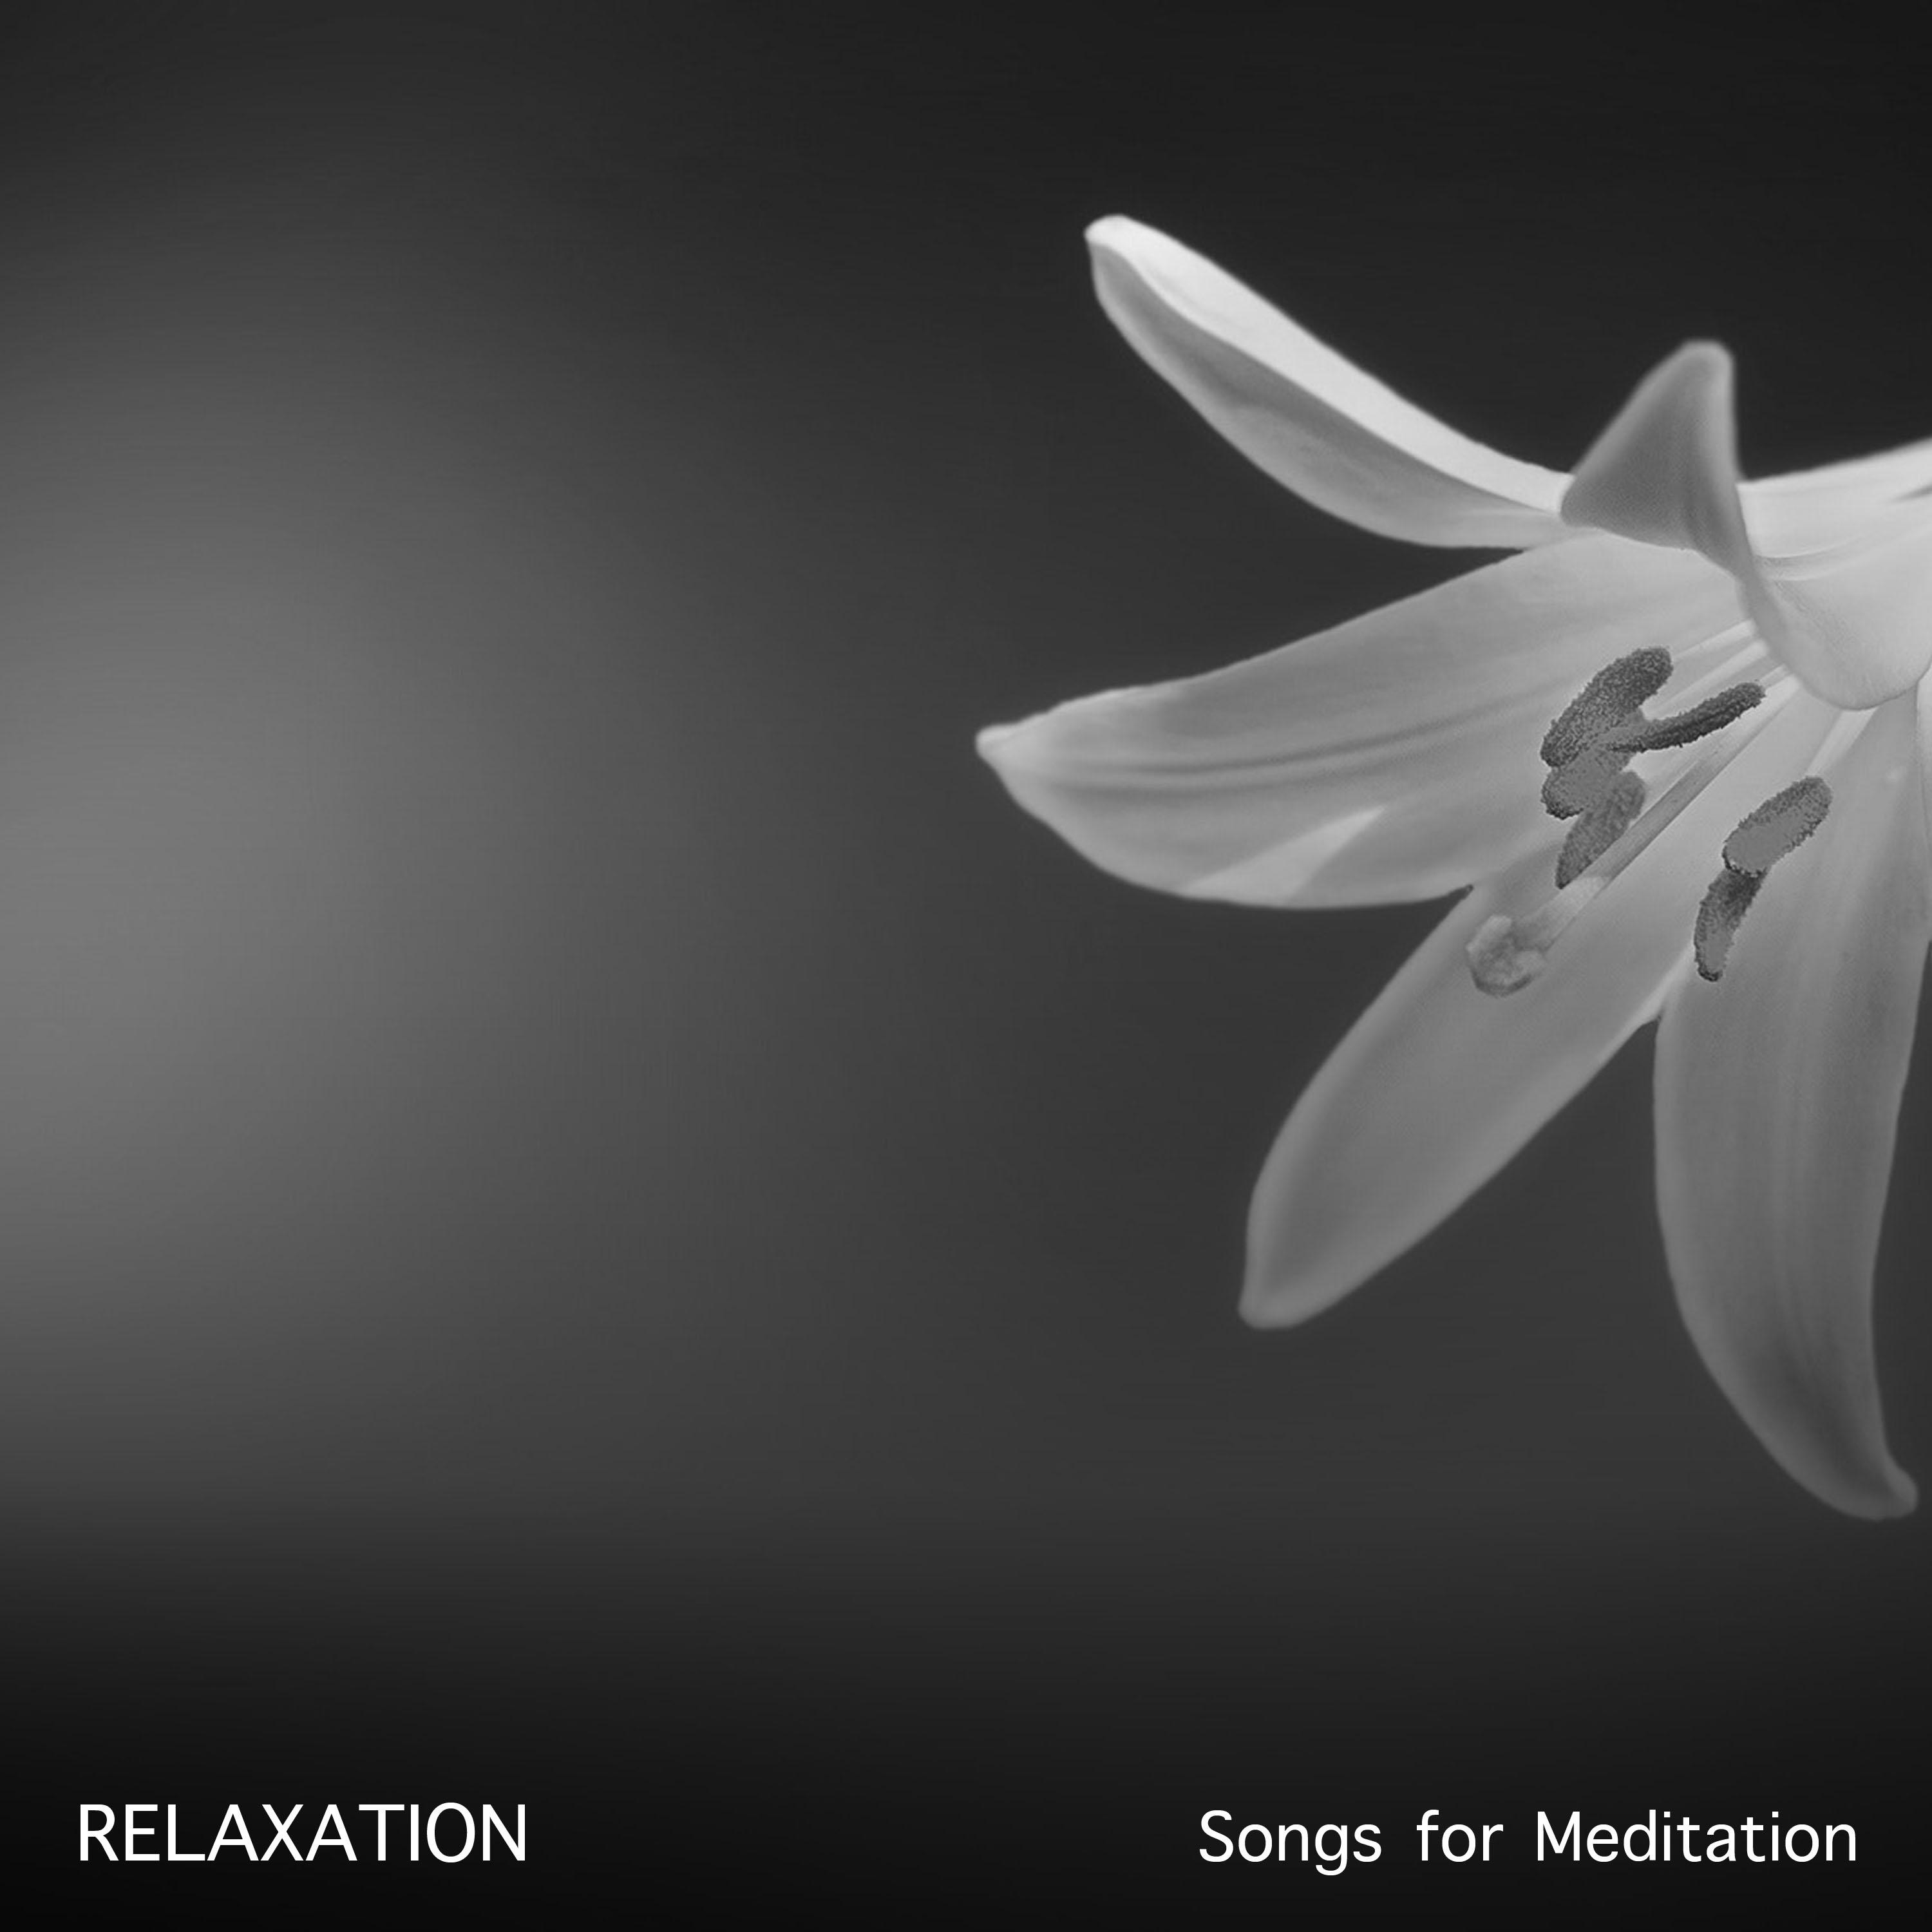 25 Songs for Meditation and Relaxation